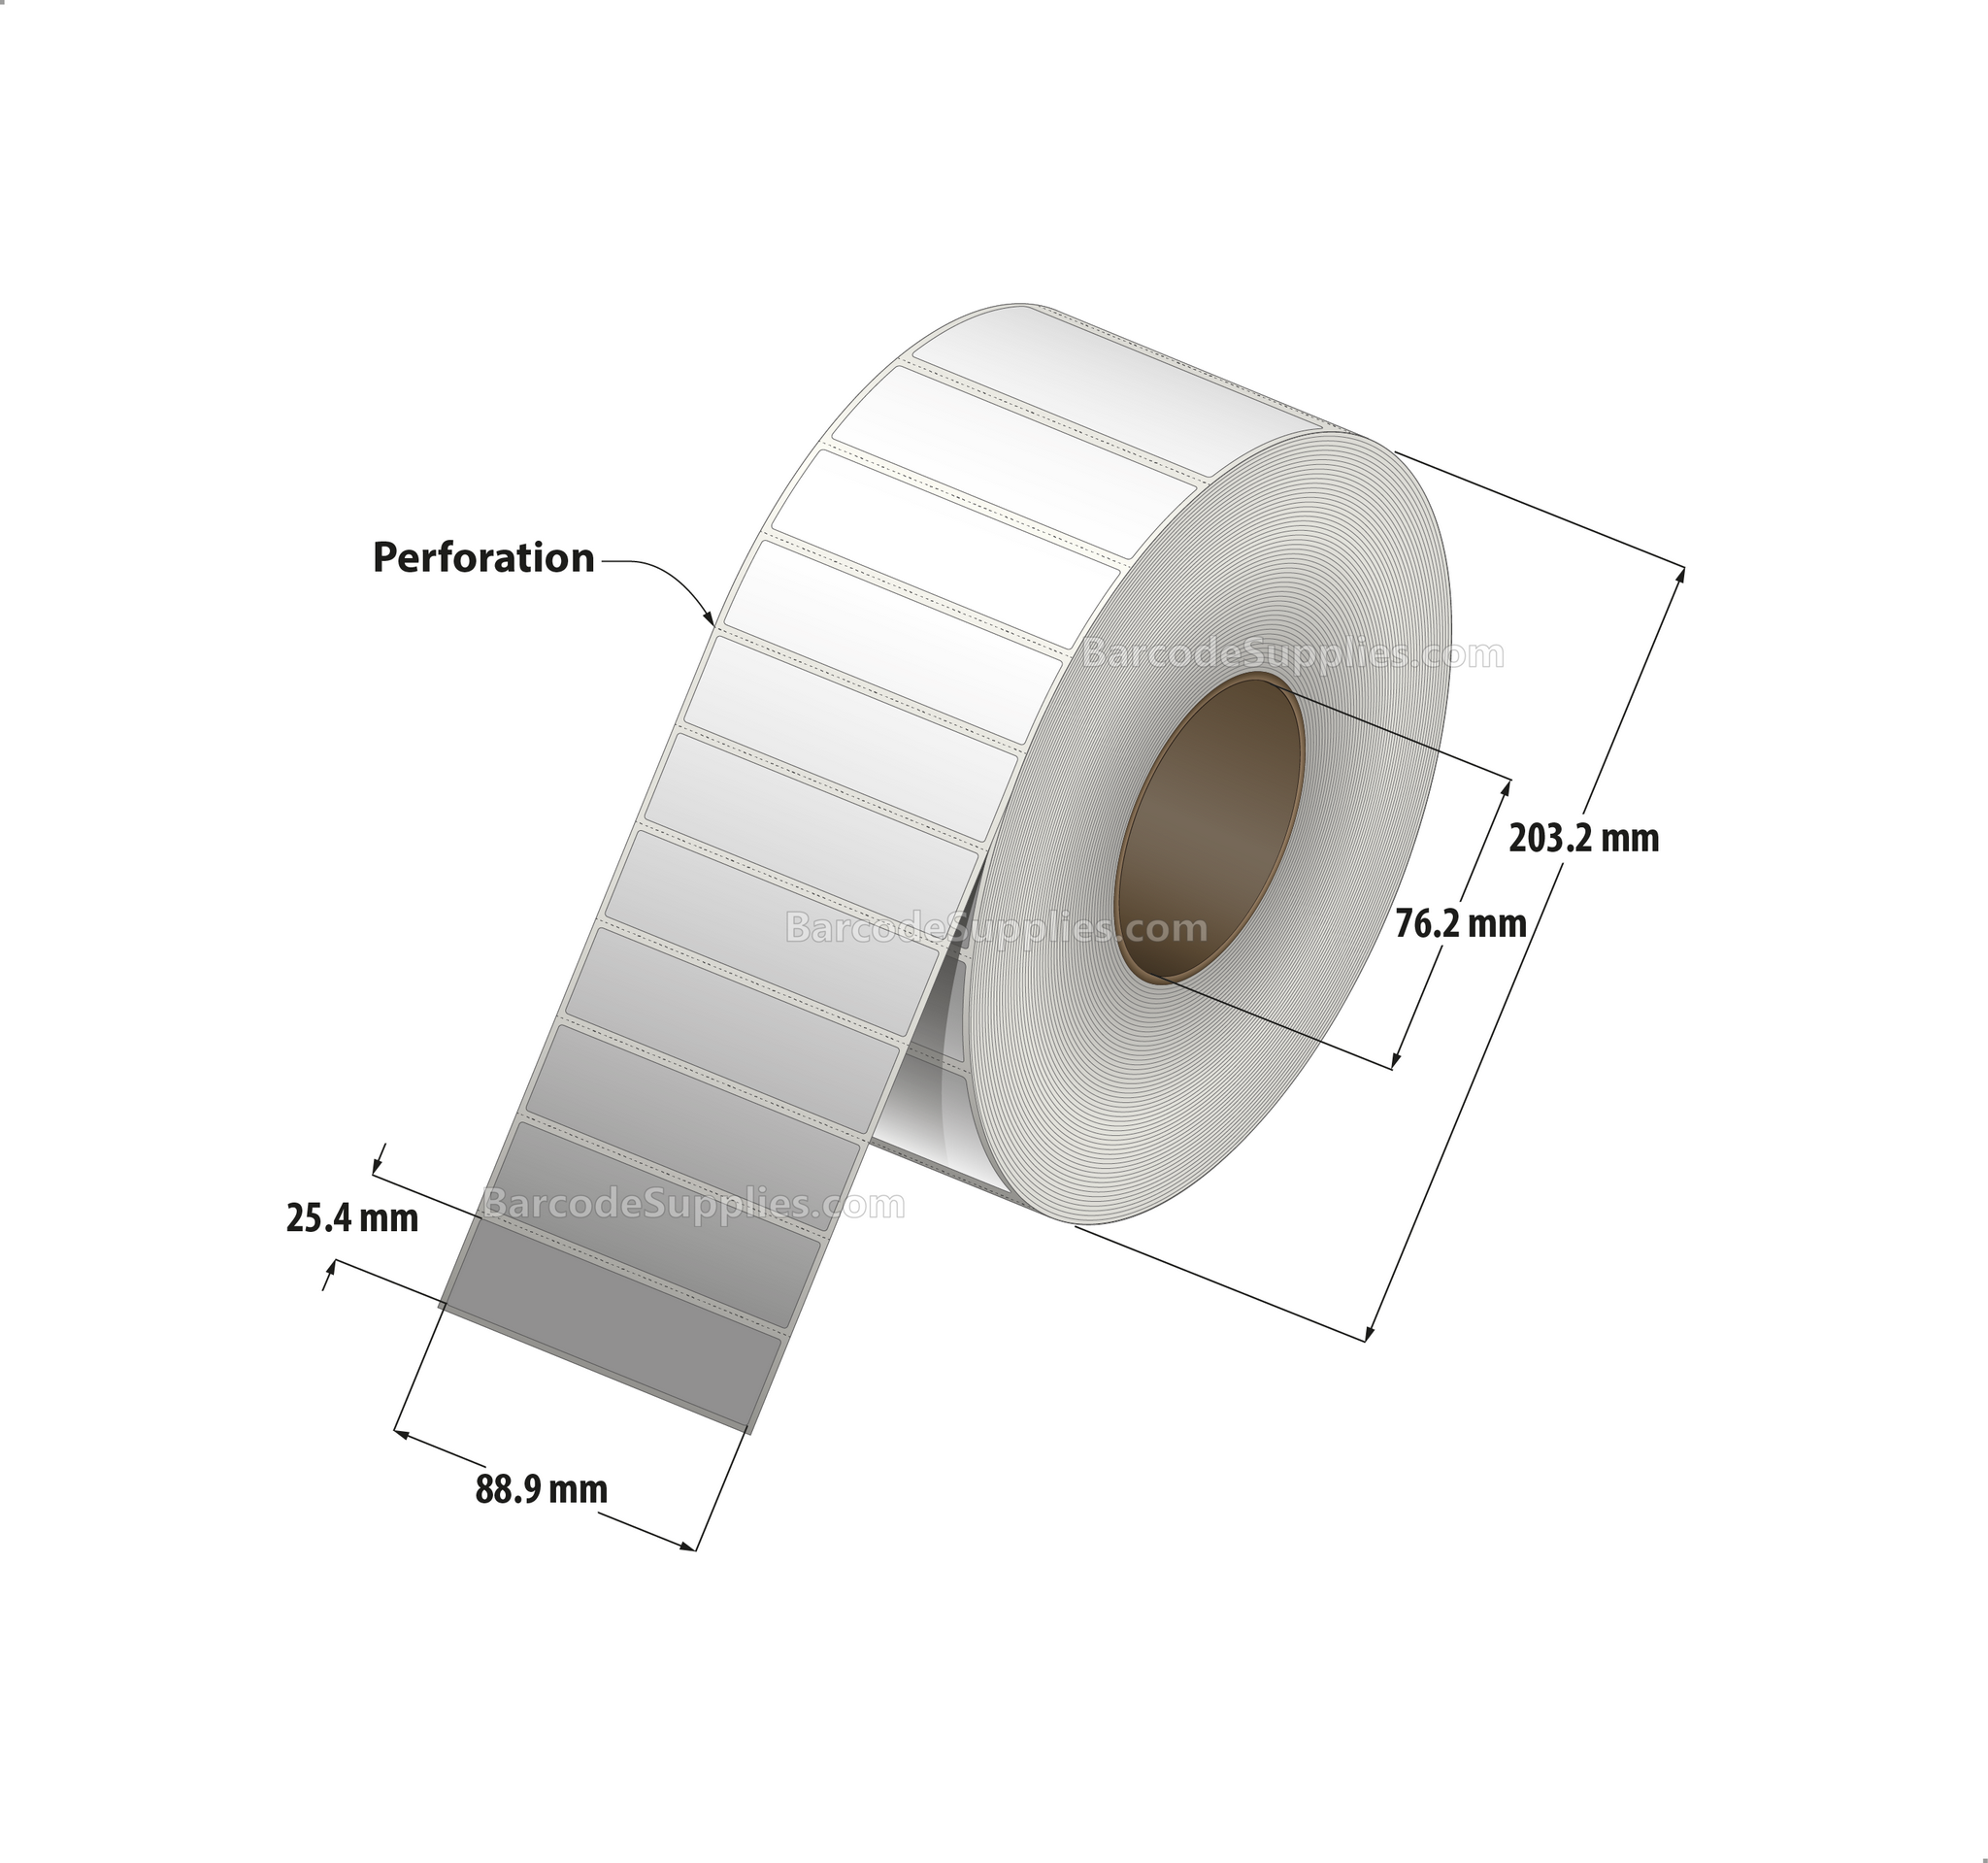 3.5 x 1 Thermal Transfer White Labels With Permanent Acrylic Adhesive - Perforated - 5500 Labels Per Roll - Carton Of 6 Rolls - 33000 Labels Total - MPN: TH351-1P